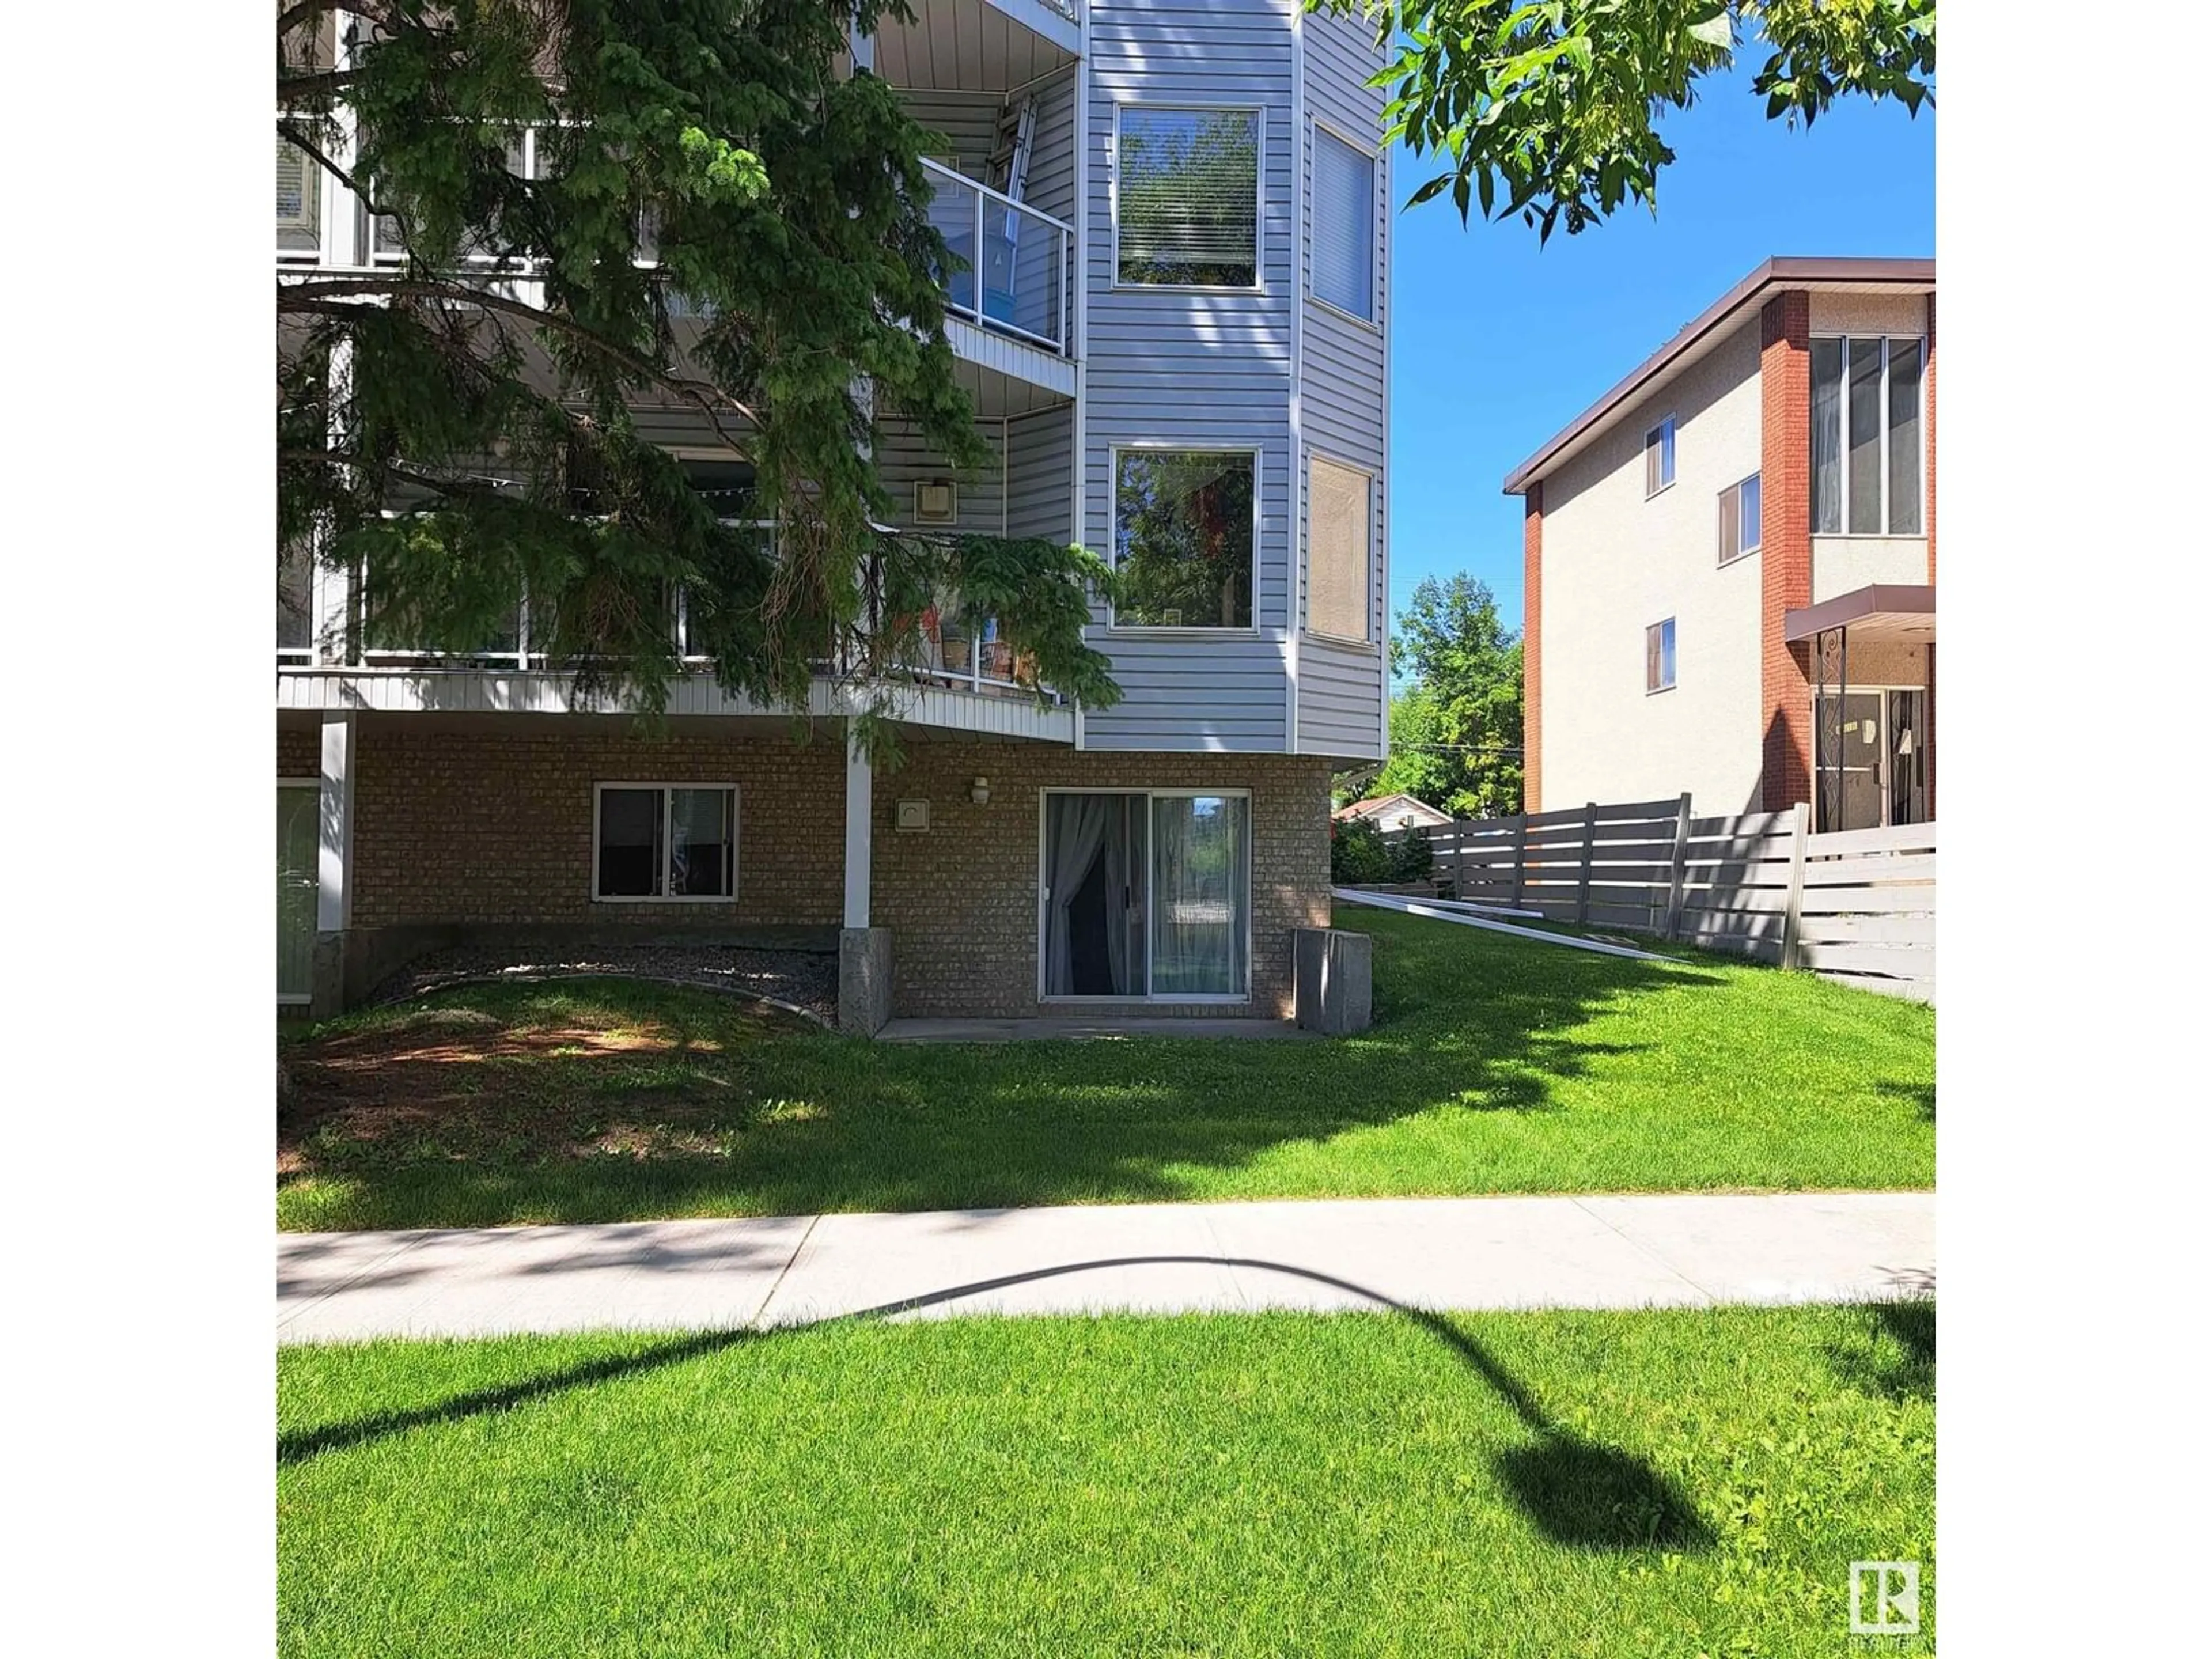 A pic from exterior of the house or condo for #103 10810 86 AV NW NW, Edmonton Alberta T6E2N2